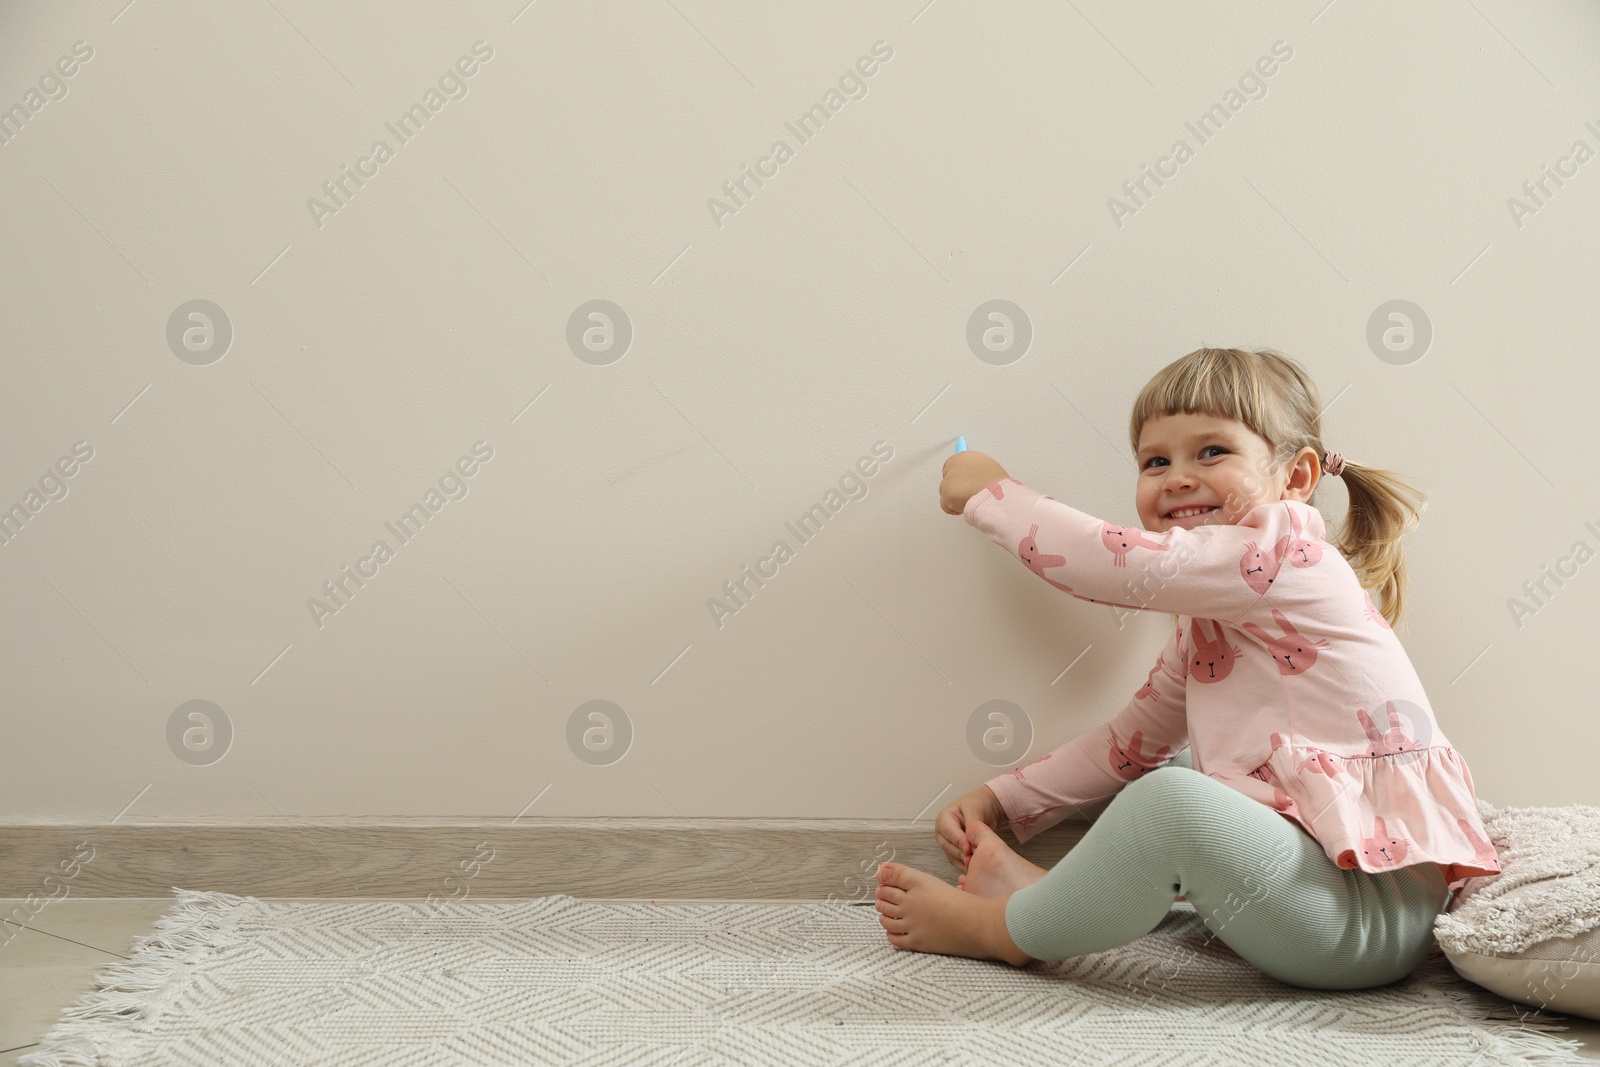 Photo of Little girl drawing on beige wall indoors, space for text. Child`s art